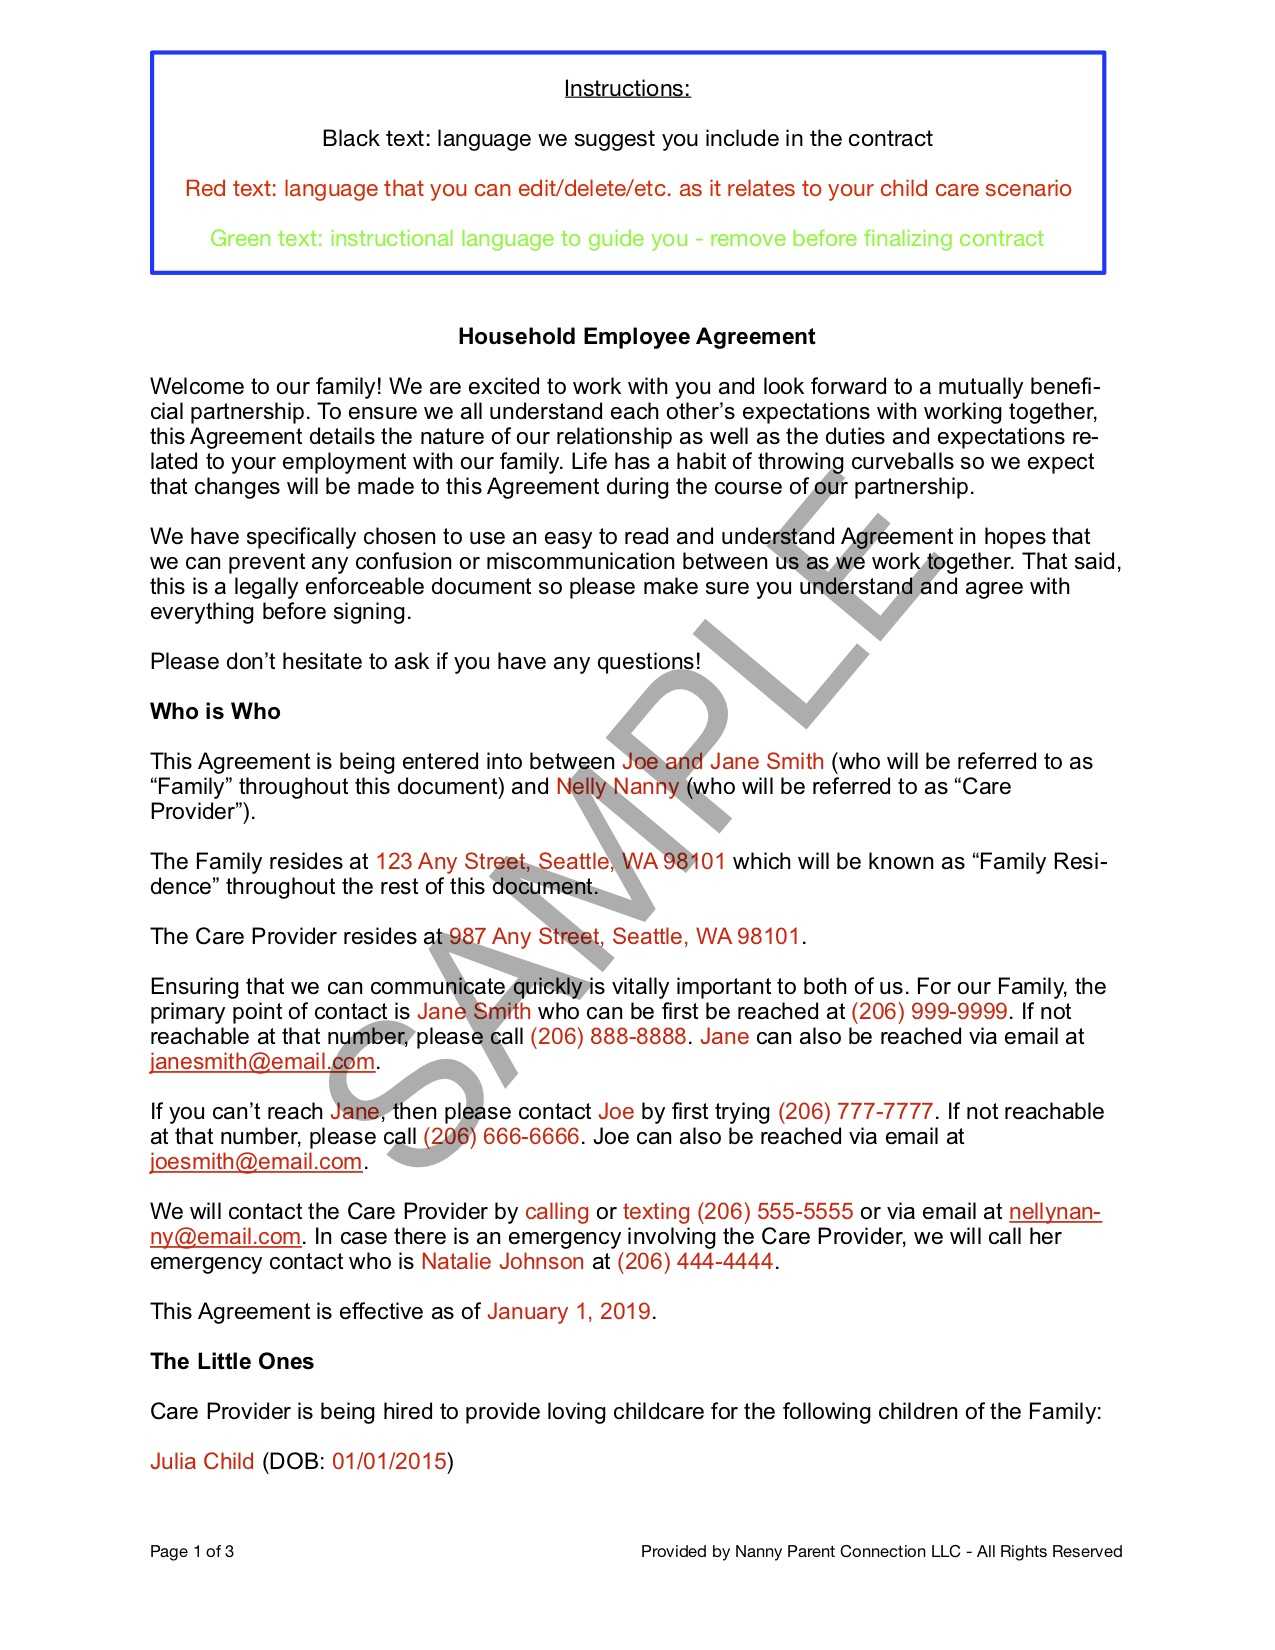 Household Employee Agreement | Nanny Parent Connection Throughout Nanny Contract Template Word